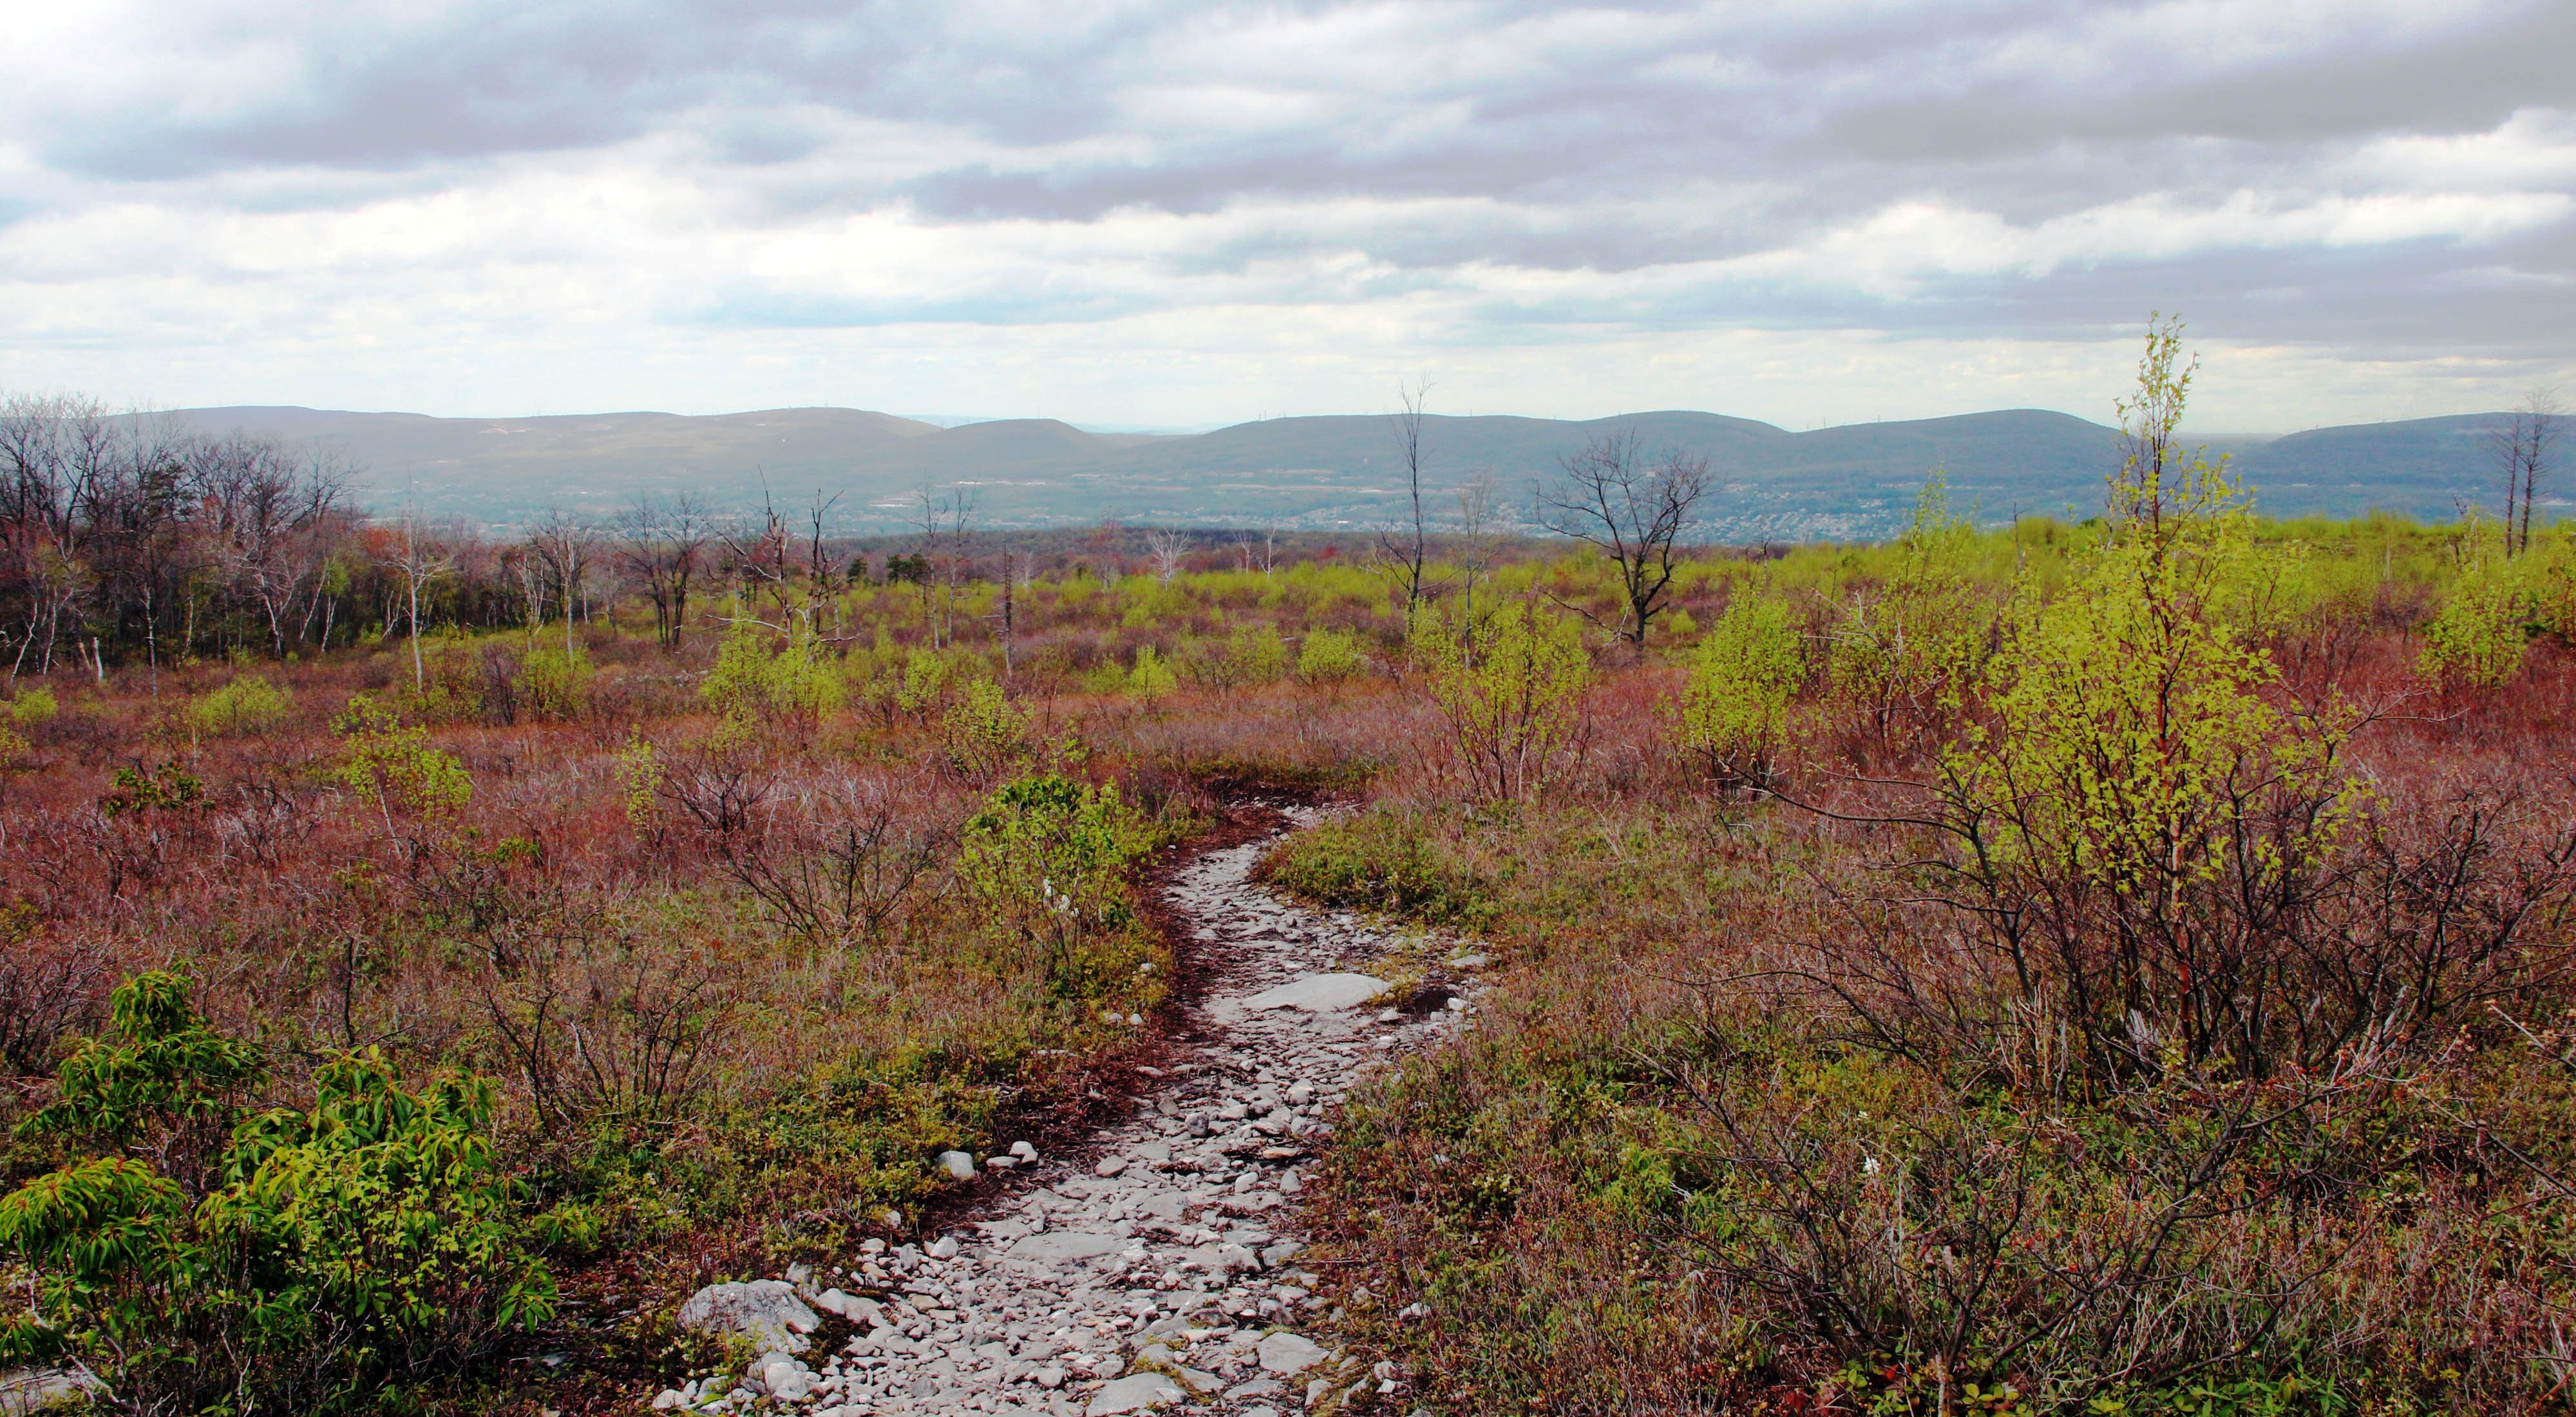 A winding cleared trail runs through the middle of a blossoming natural area into the horizon.